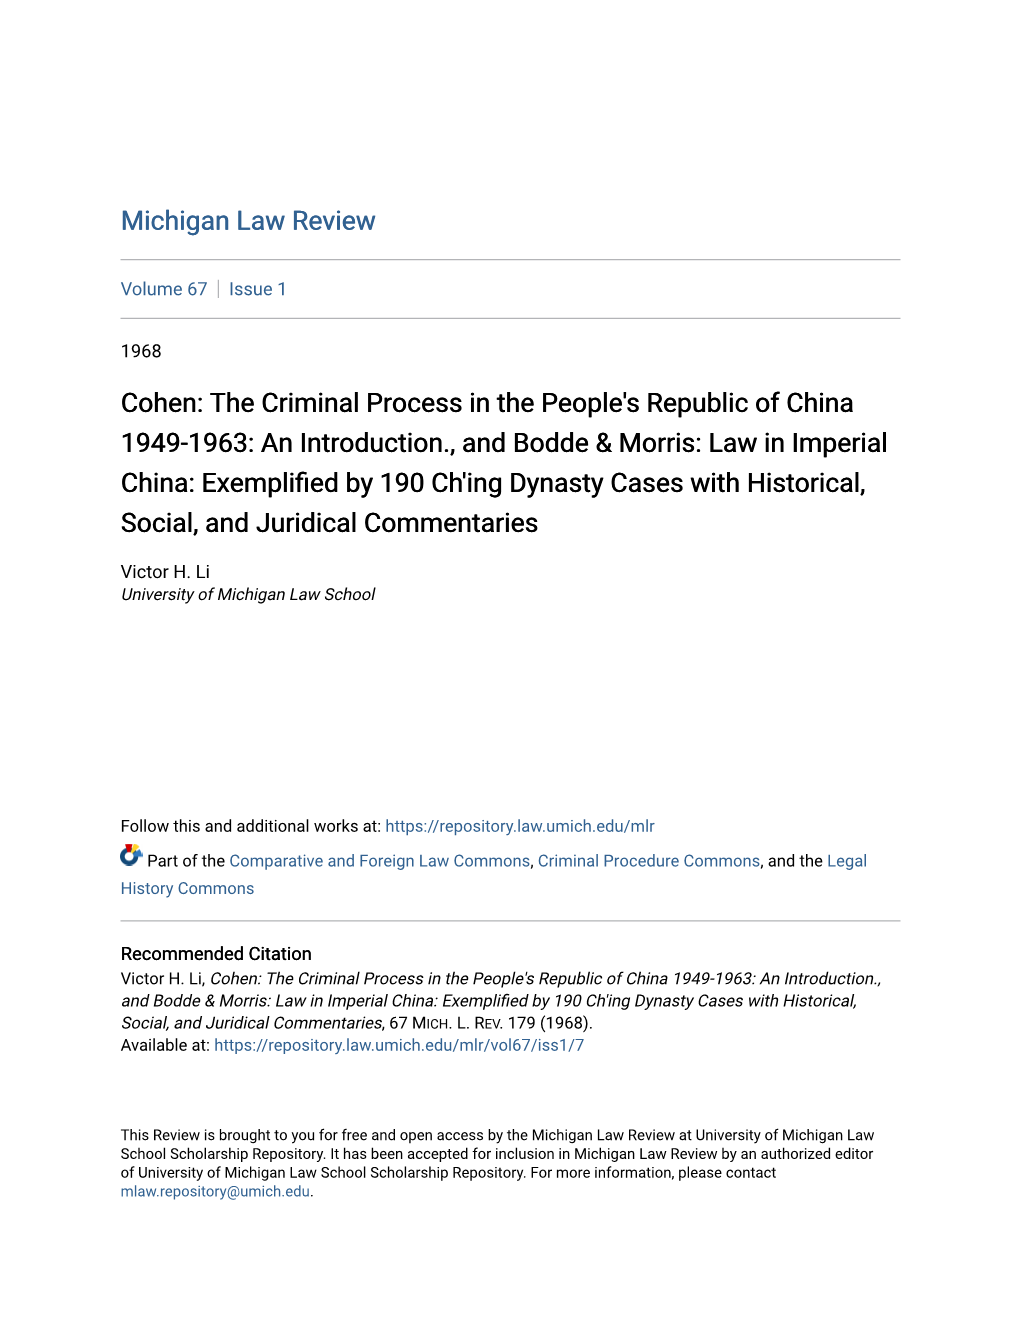 The Criminal Process in the People's Republic of China 1949-1963